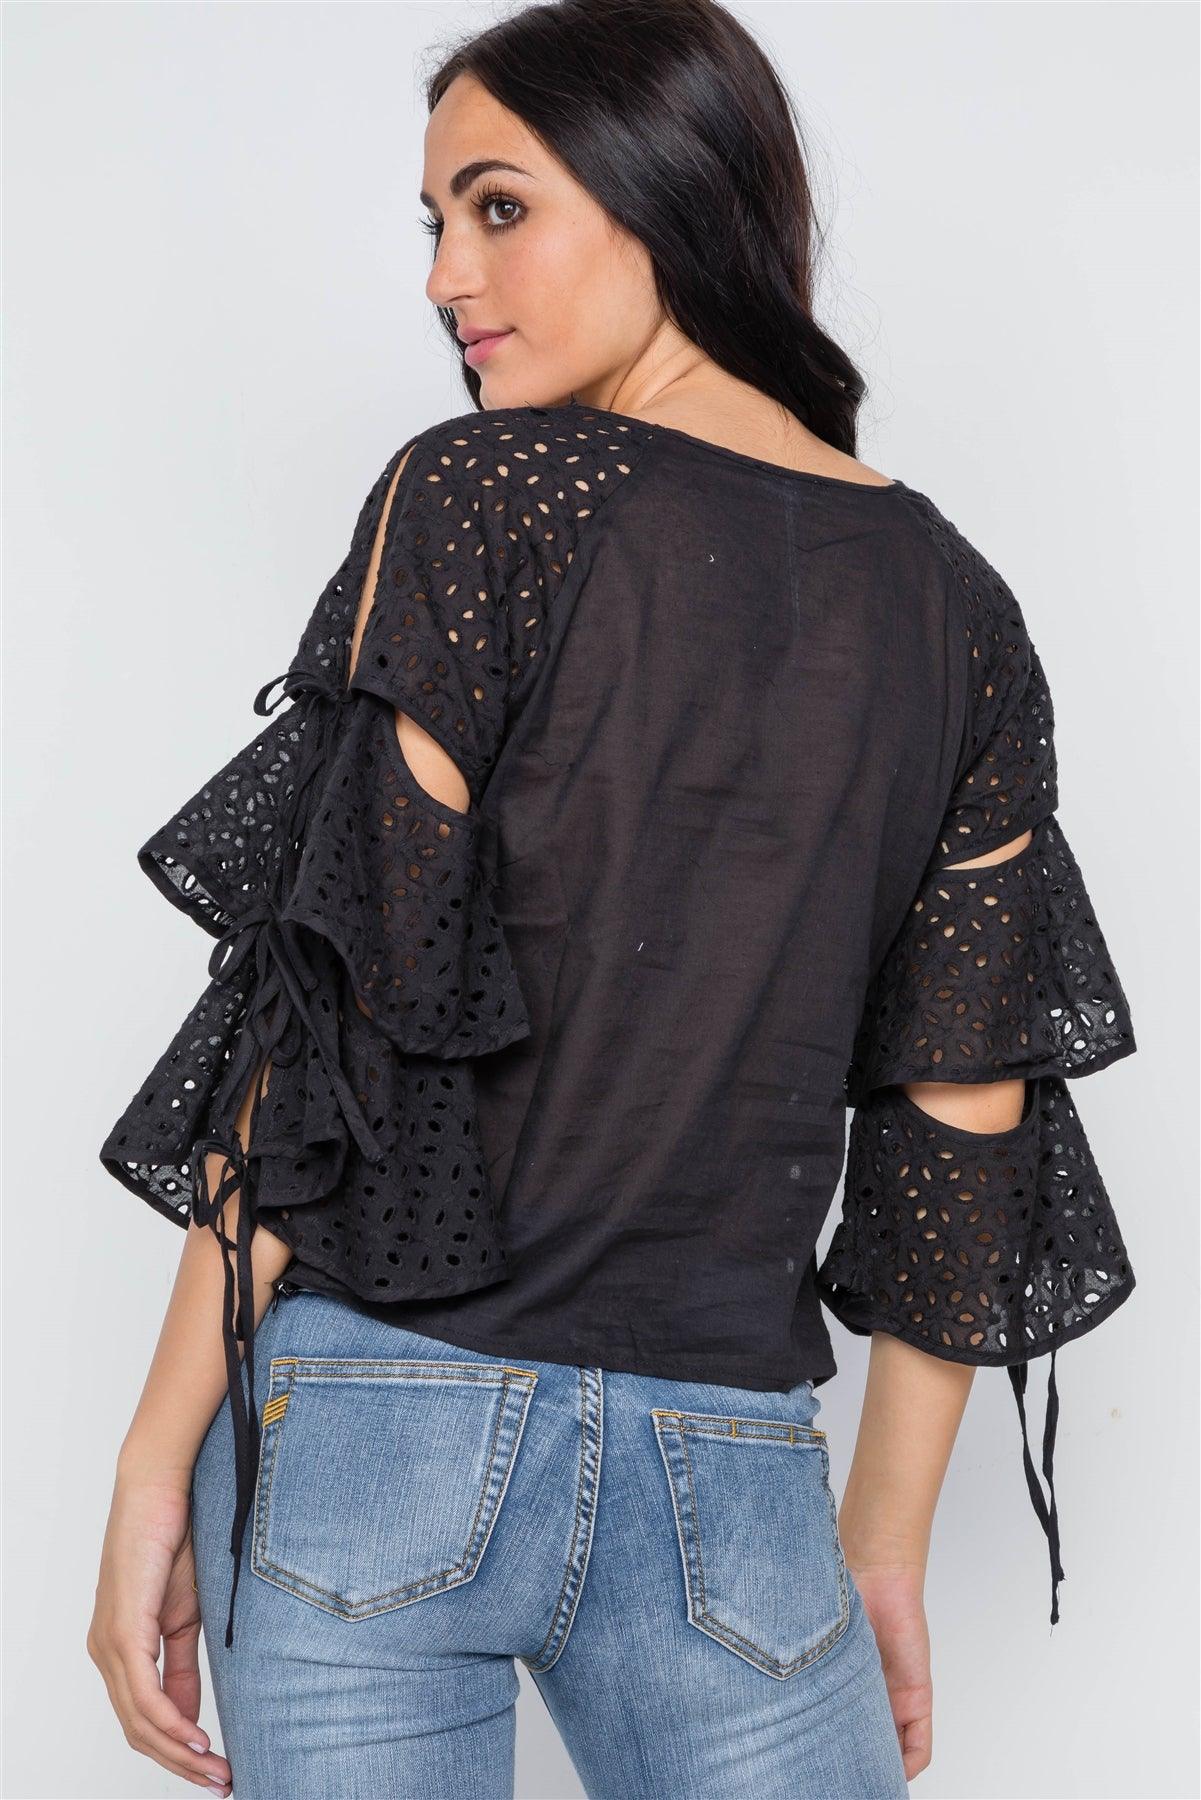 Black Floral Embroidery Cut Out Flounce Sleeve Top